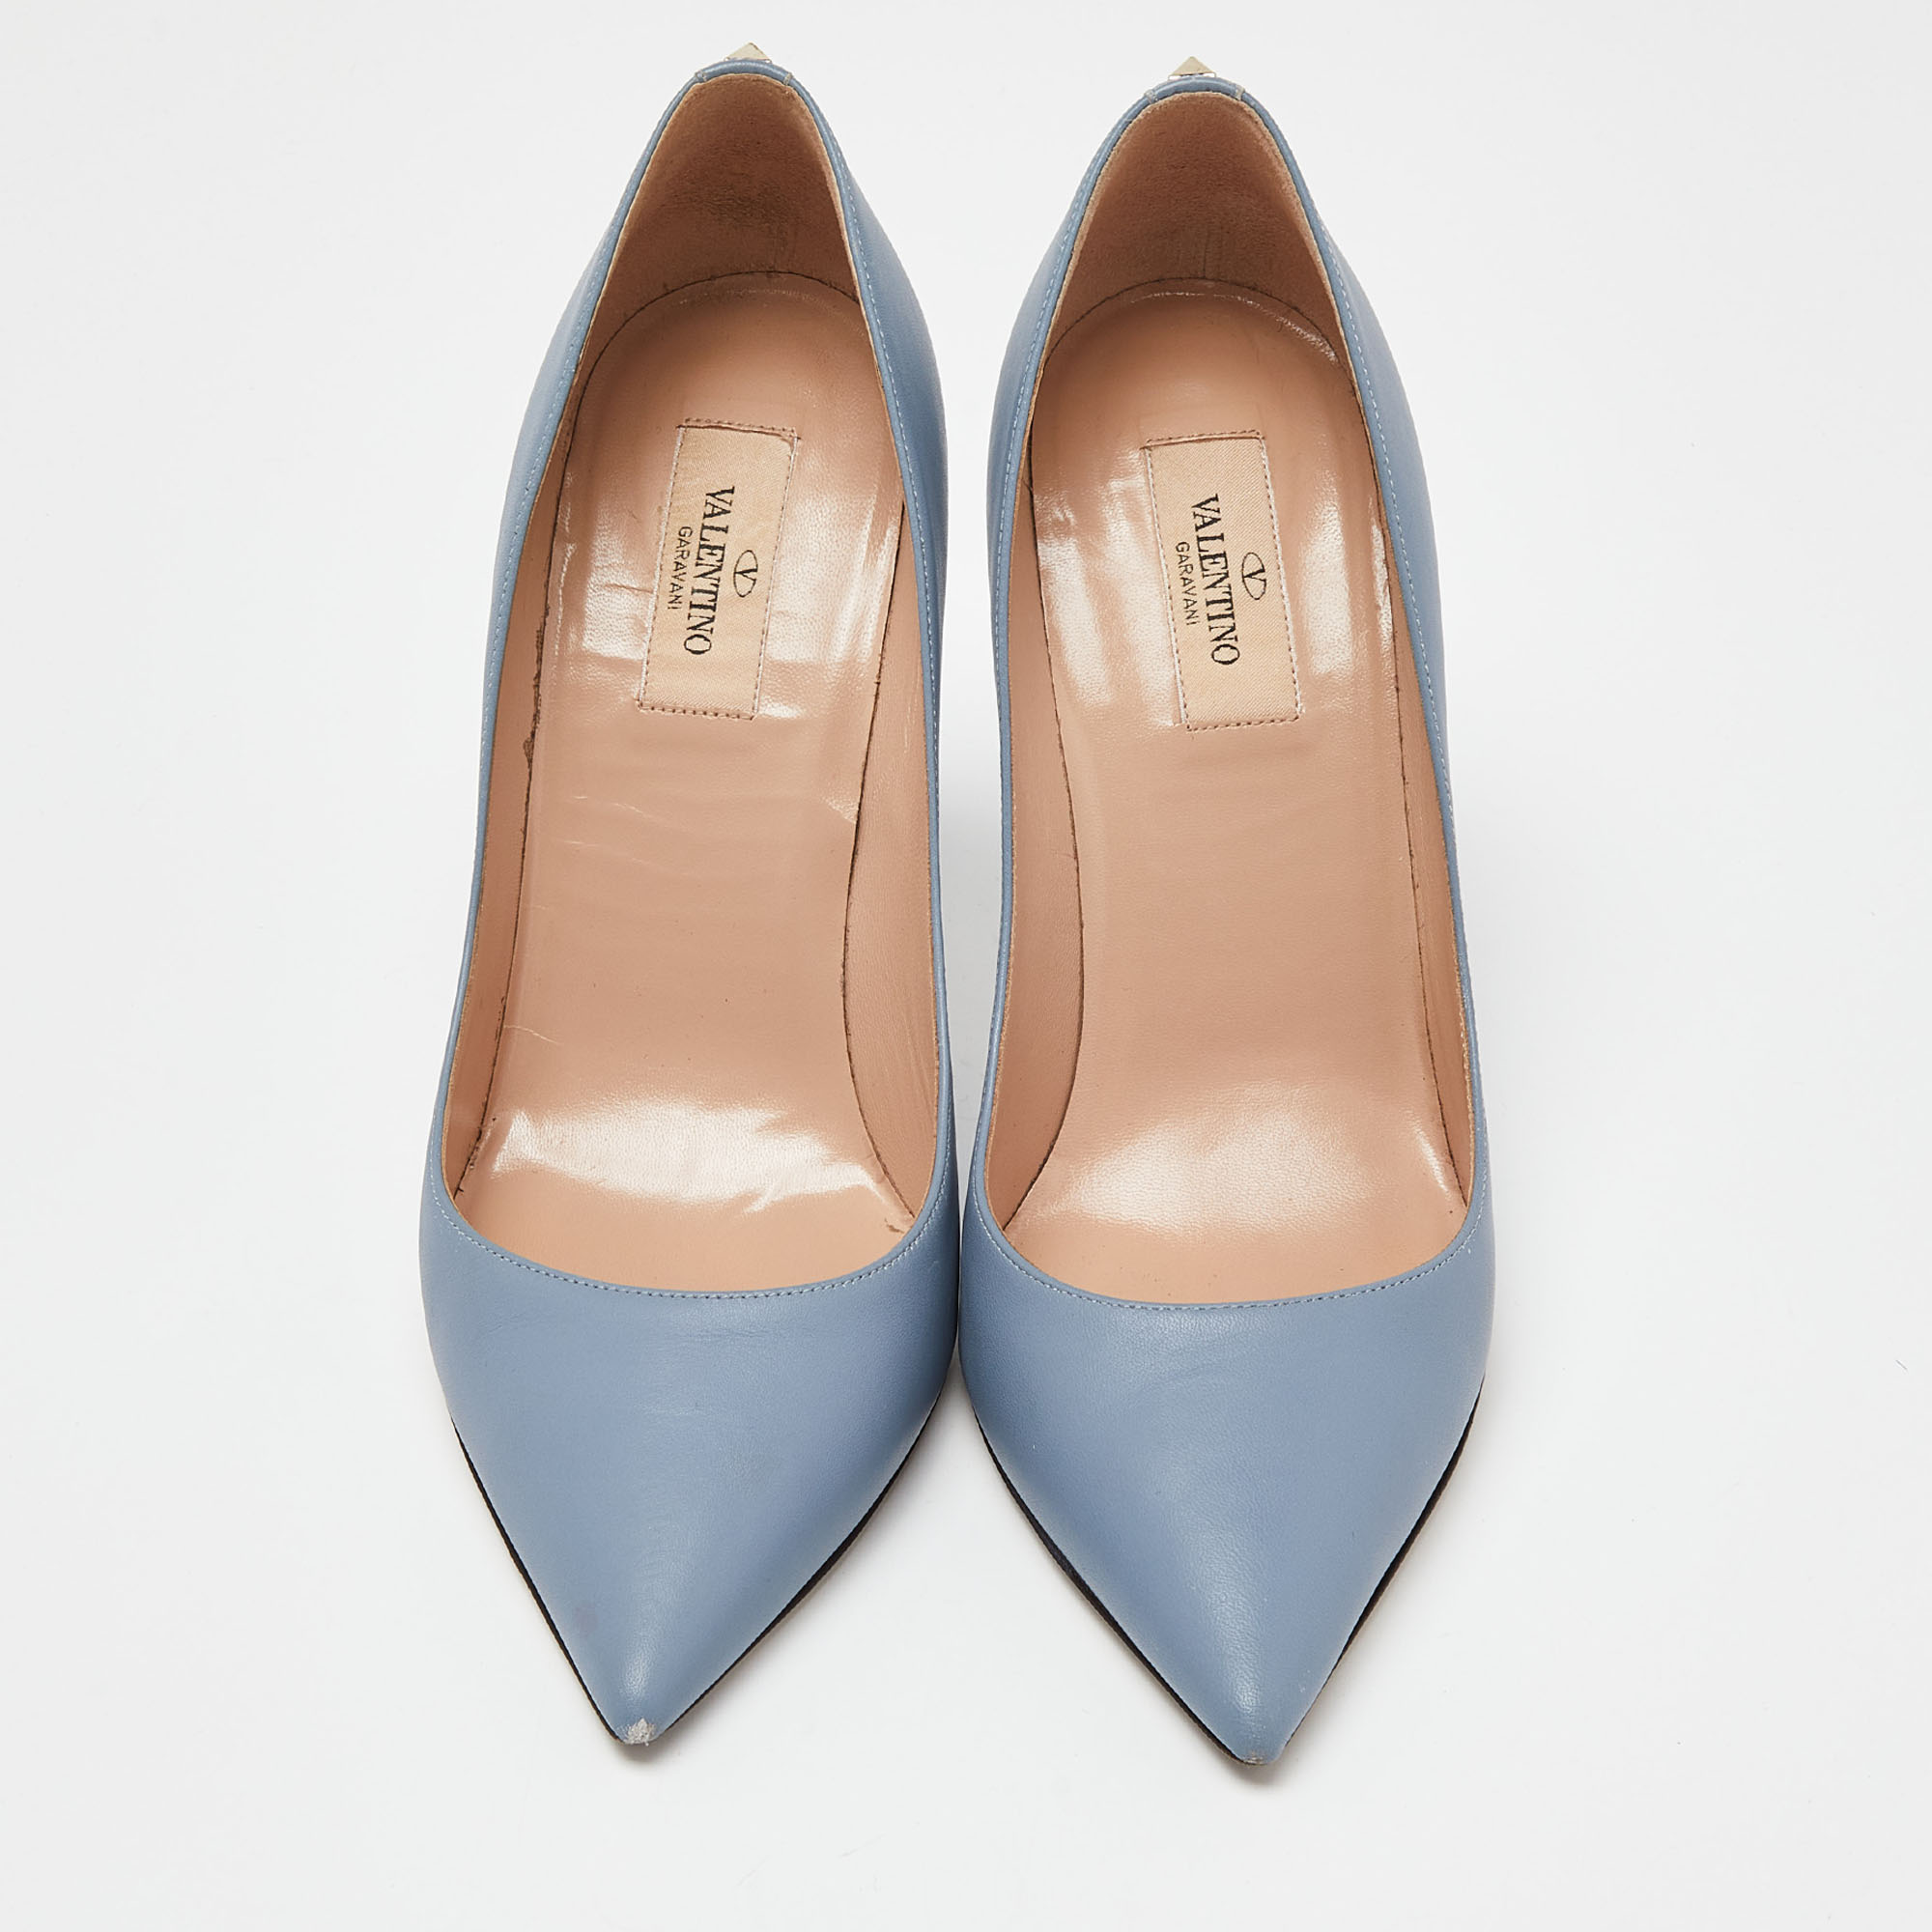 Valentino Blue Leather Pointed Toe Pumps Size 39.5